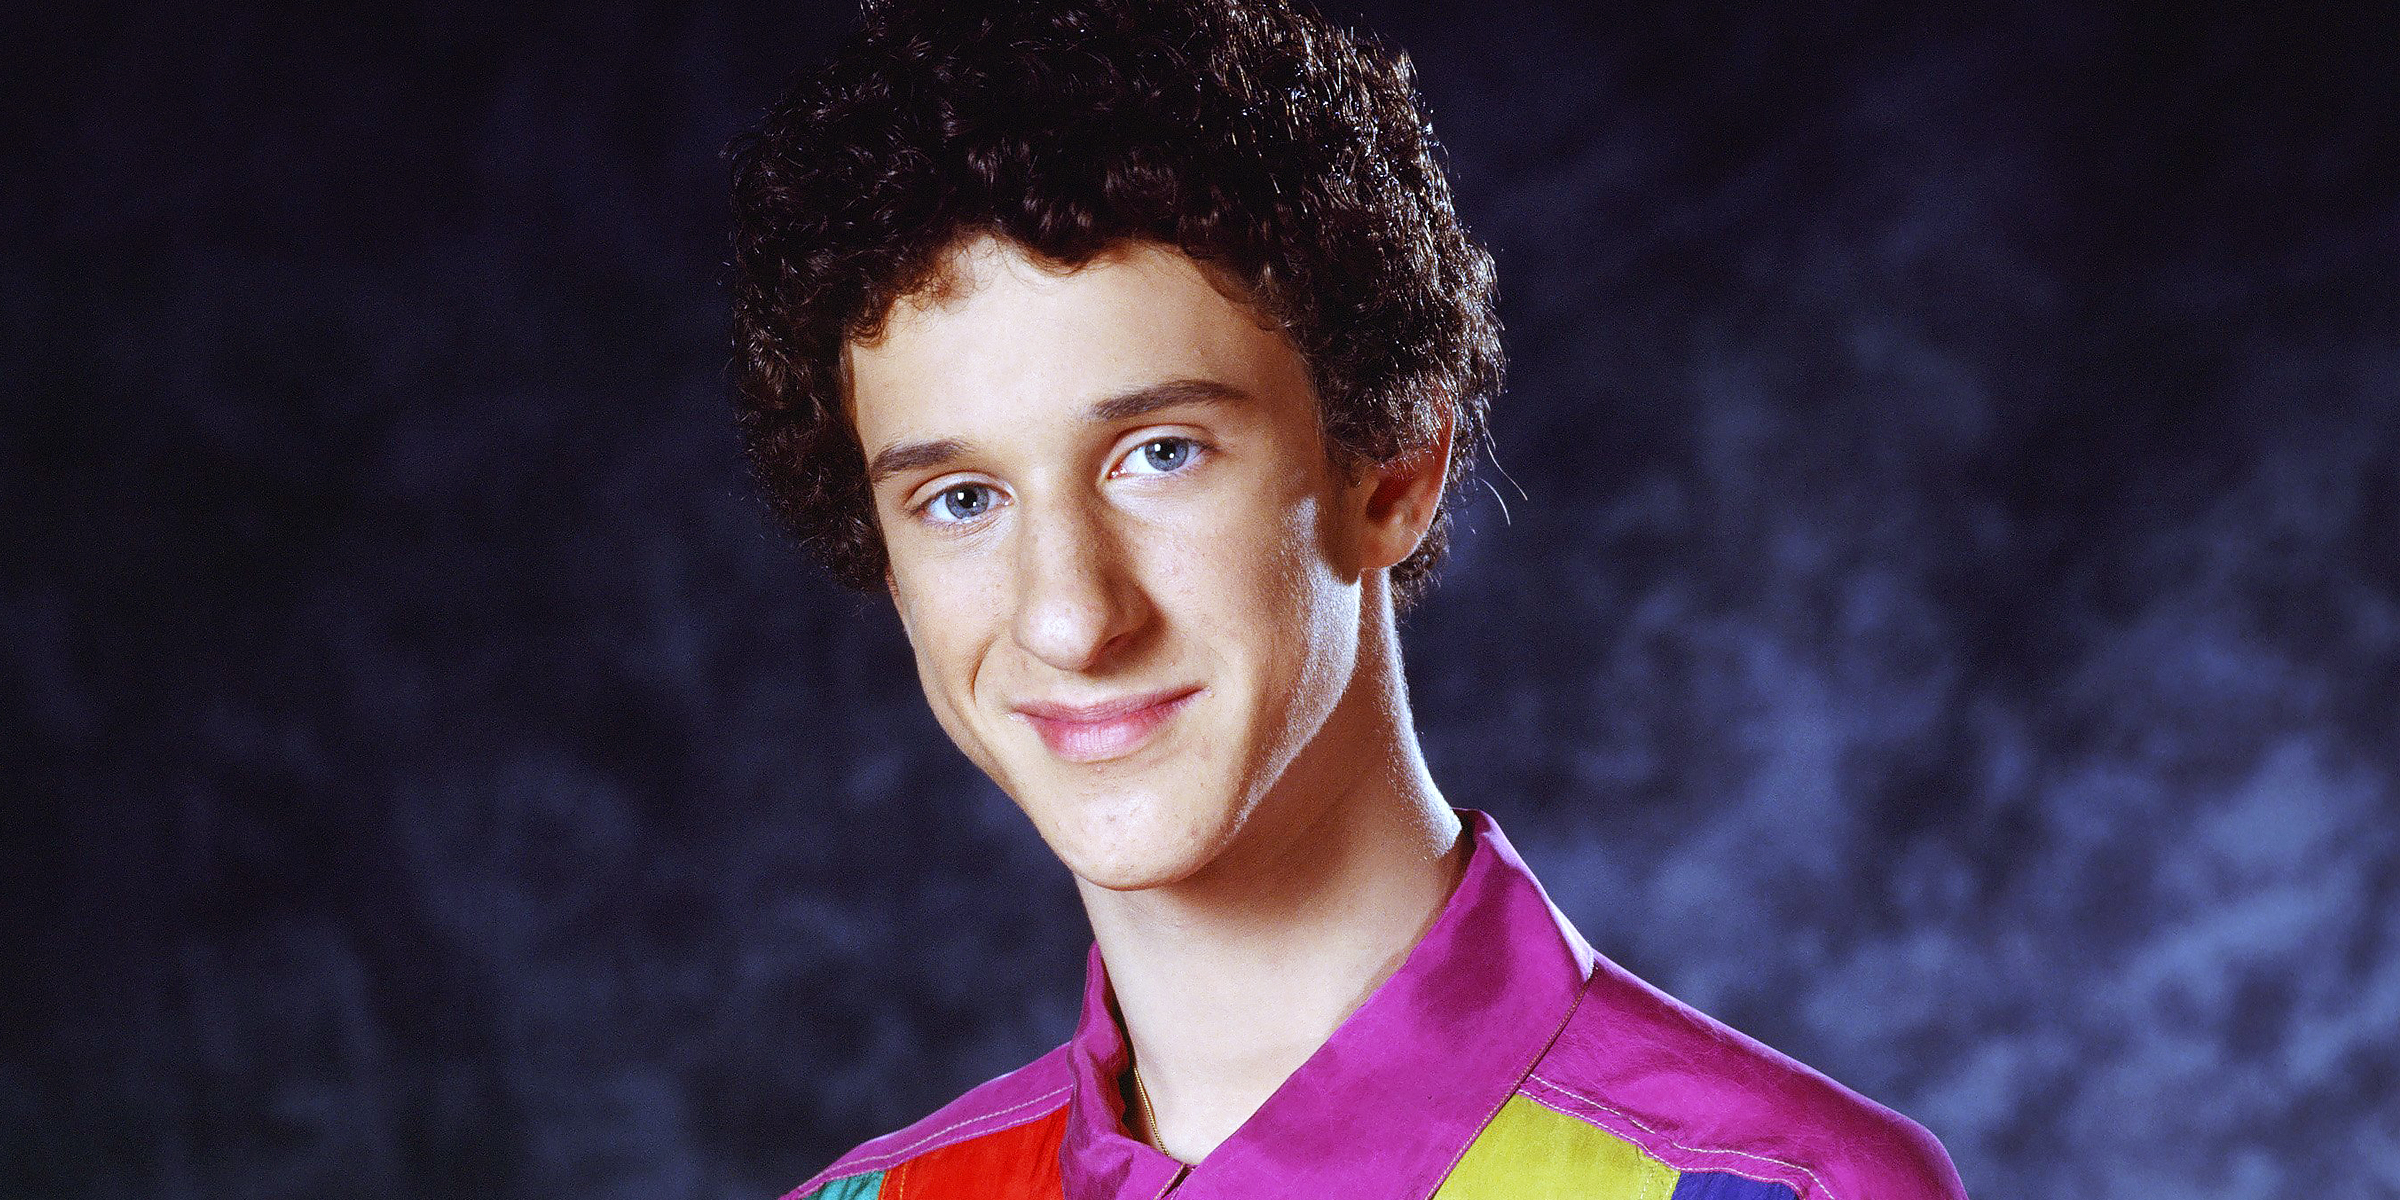 Dustin Diamond | Source: Getty Images